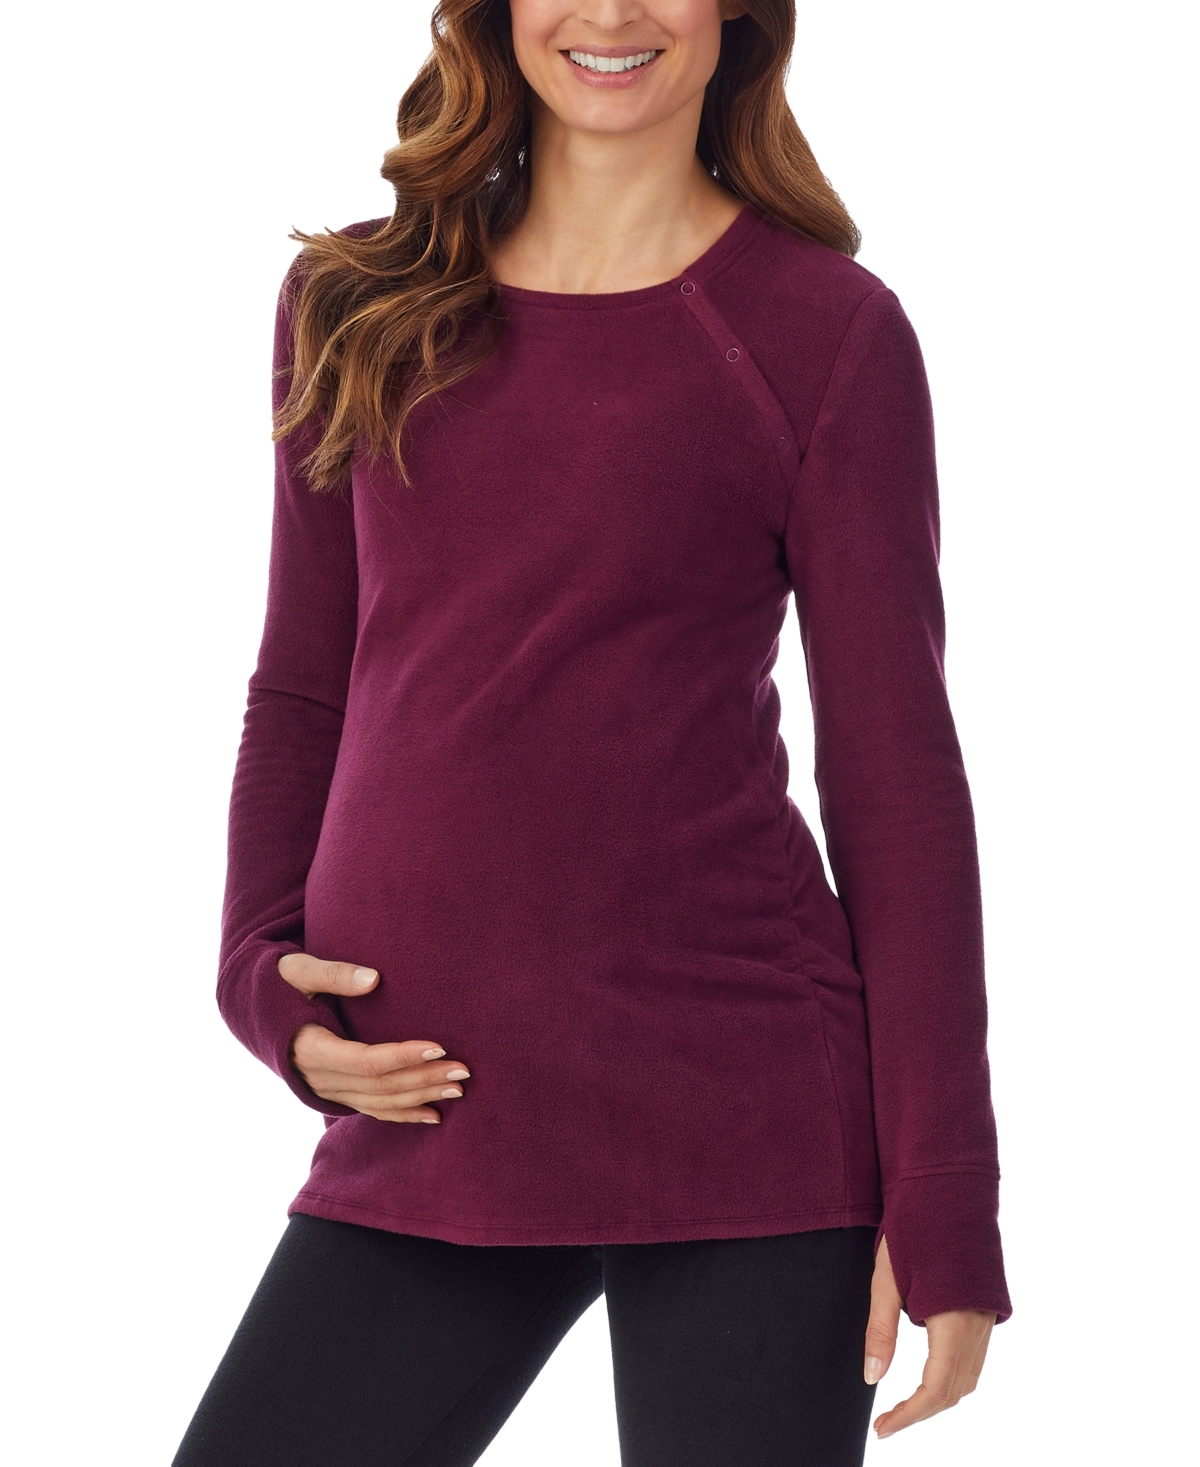 Women's Long-Sleeve Snap-Front Maternity Top - Black